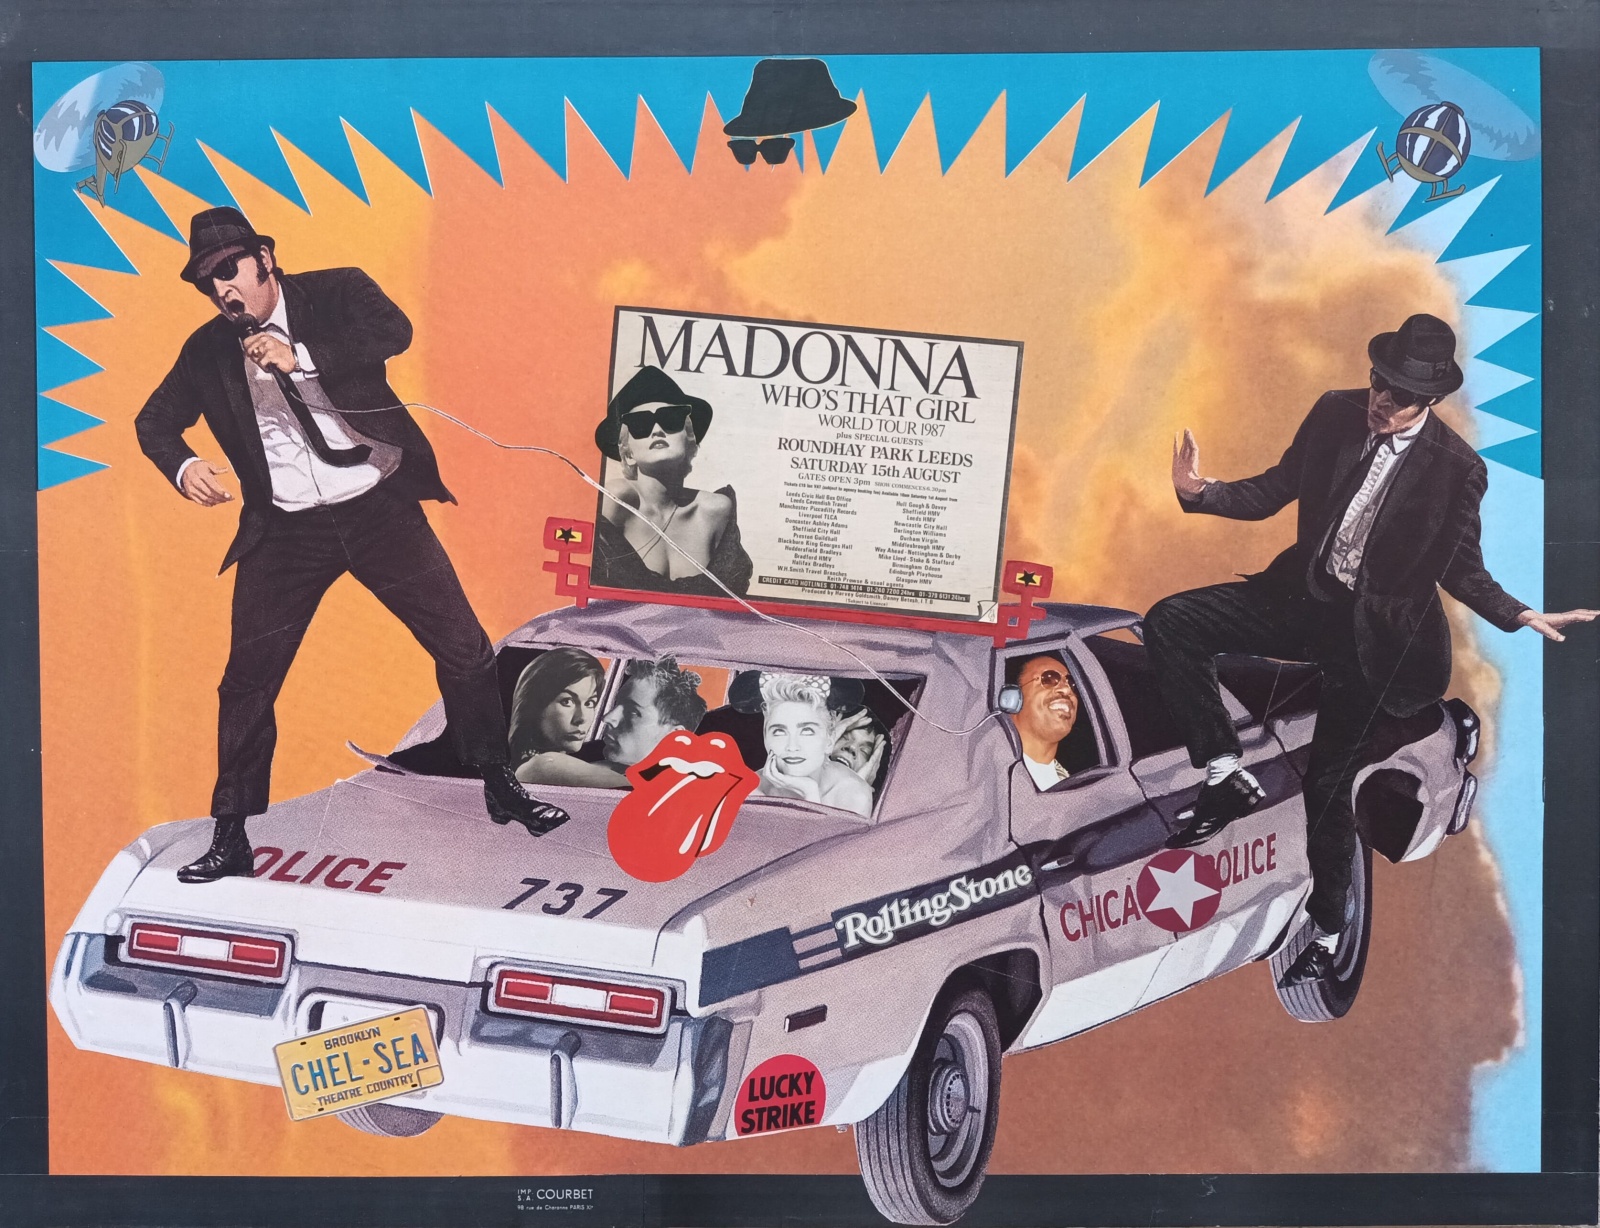 BLUES BROTHERS - 115X88
1200 EURO